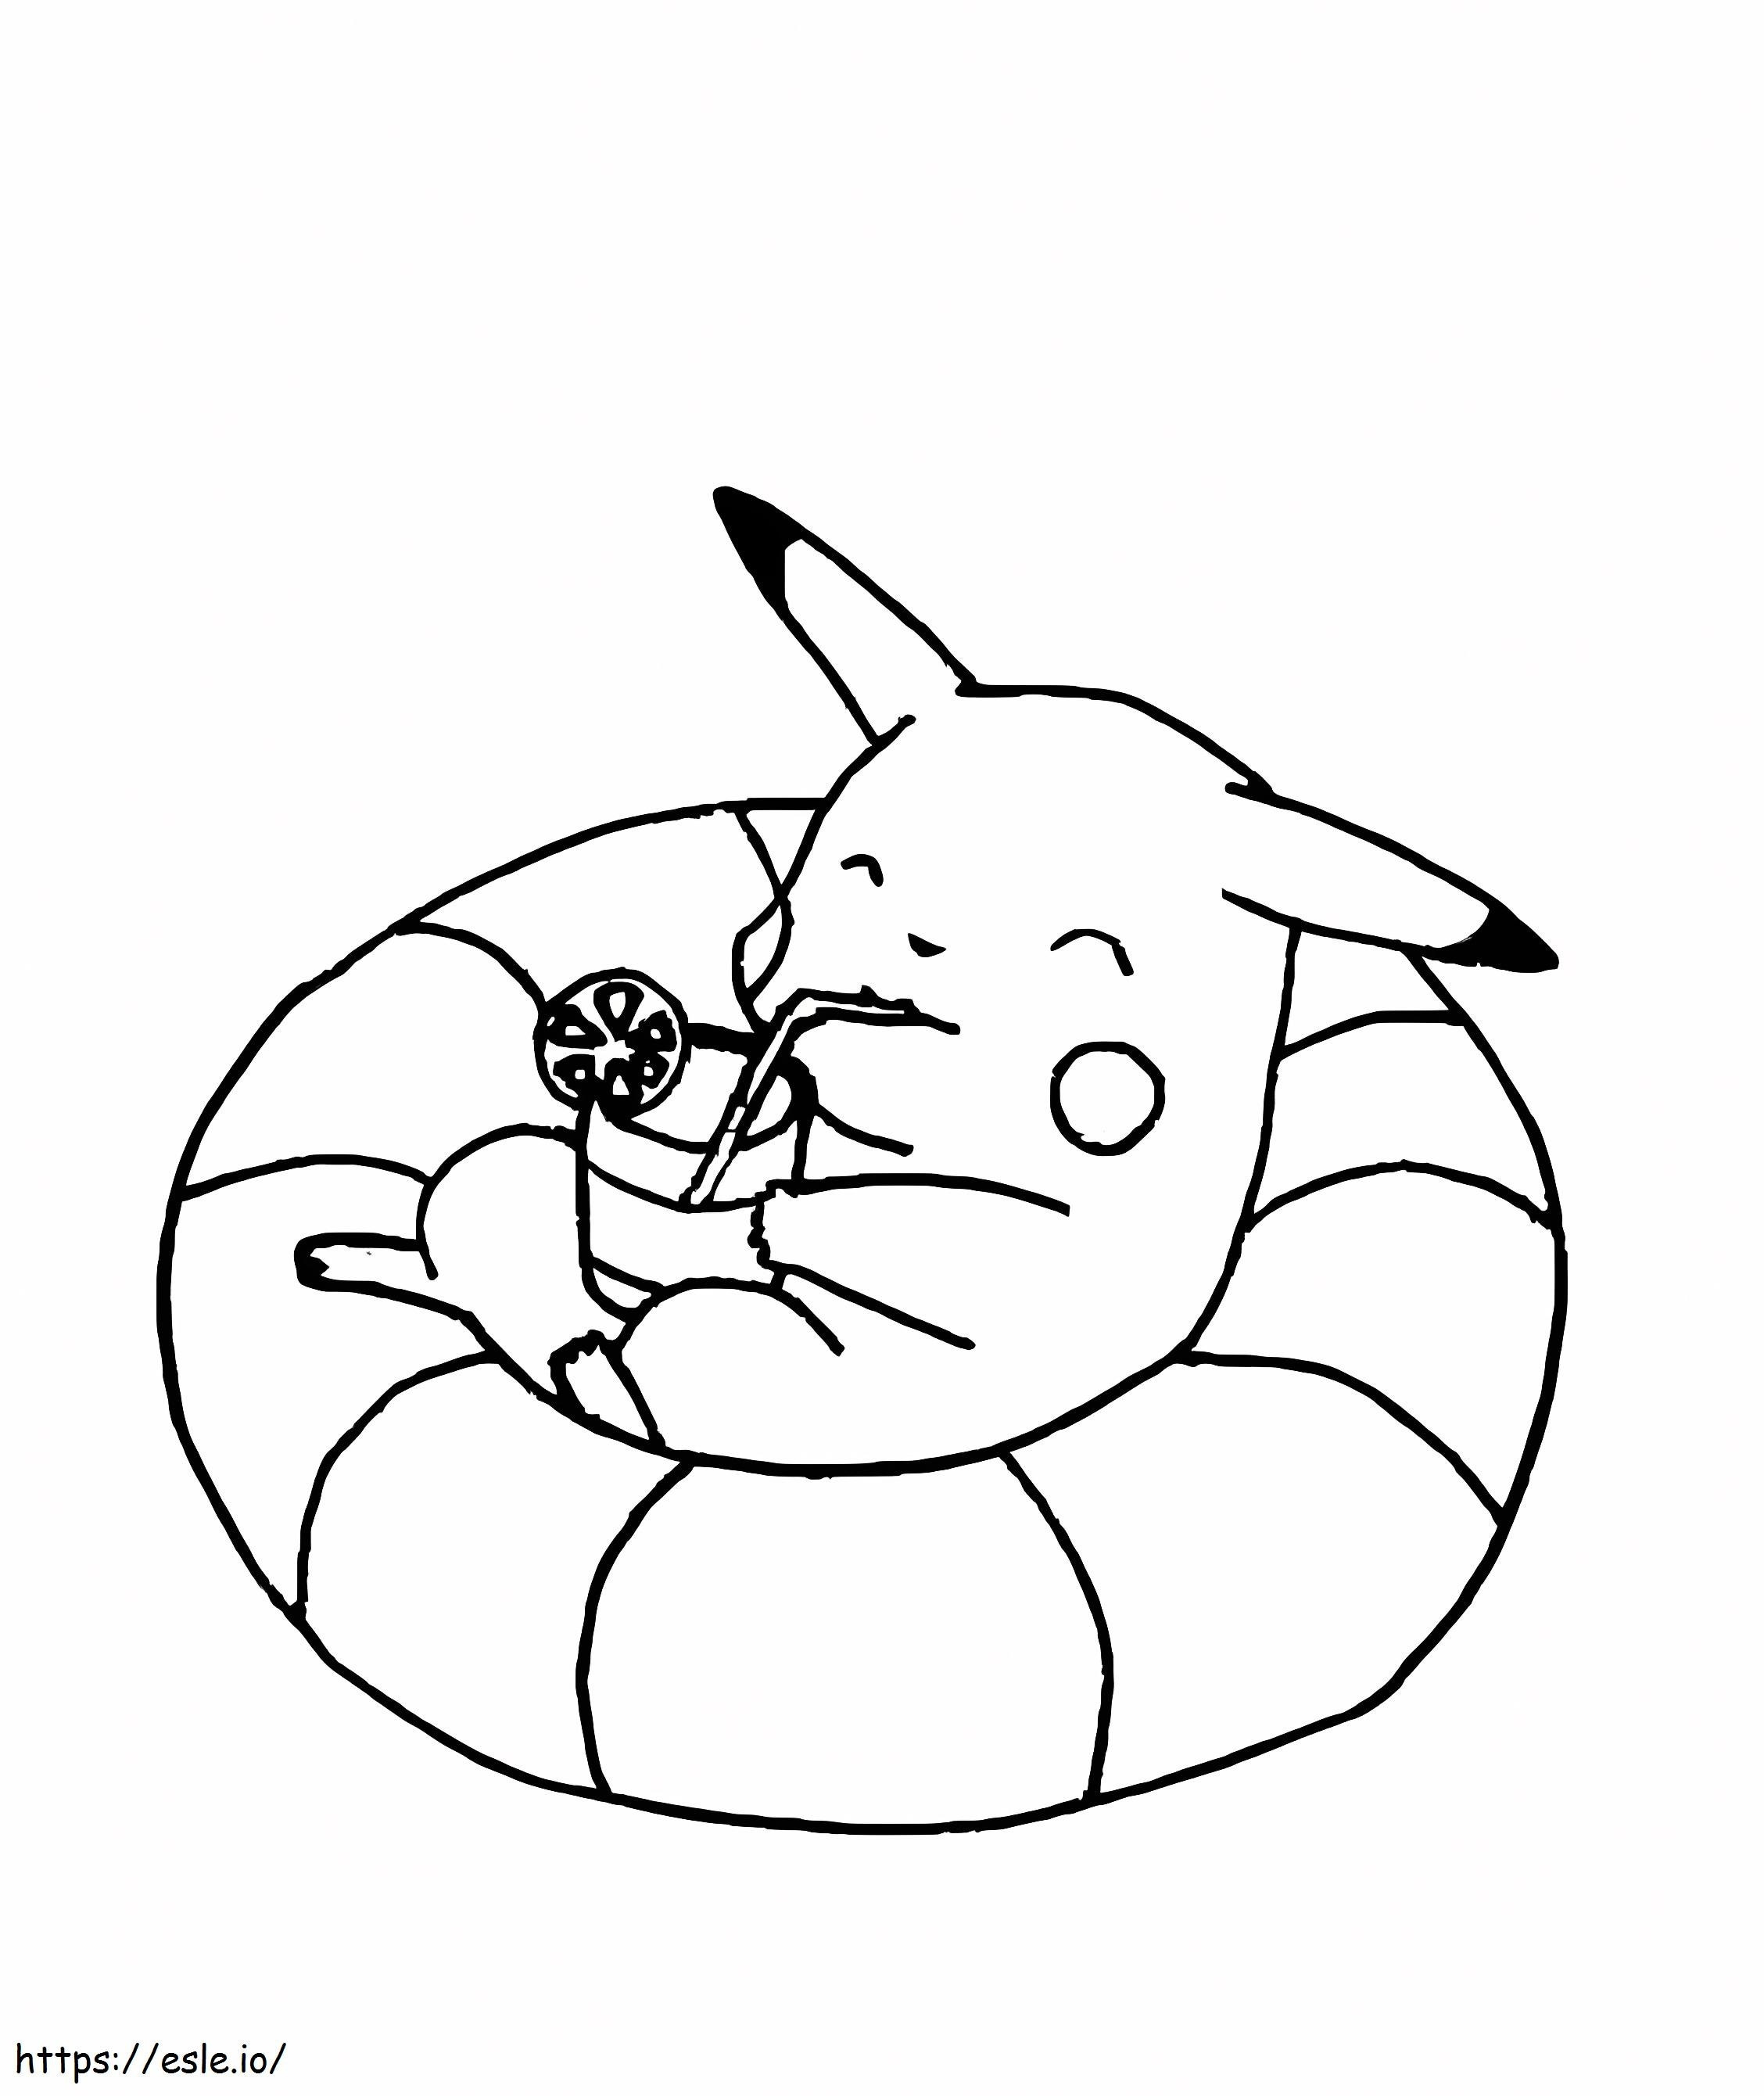 Pikachu Stops coloring page